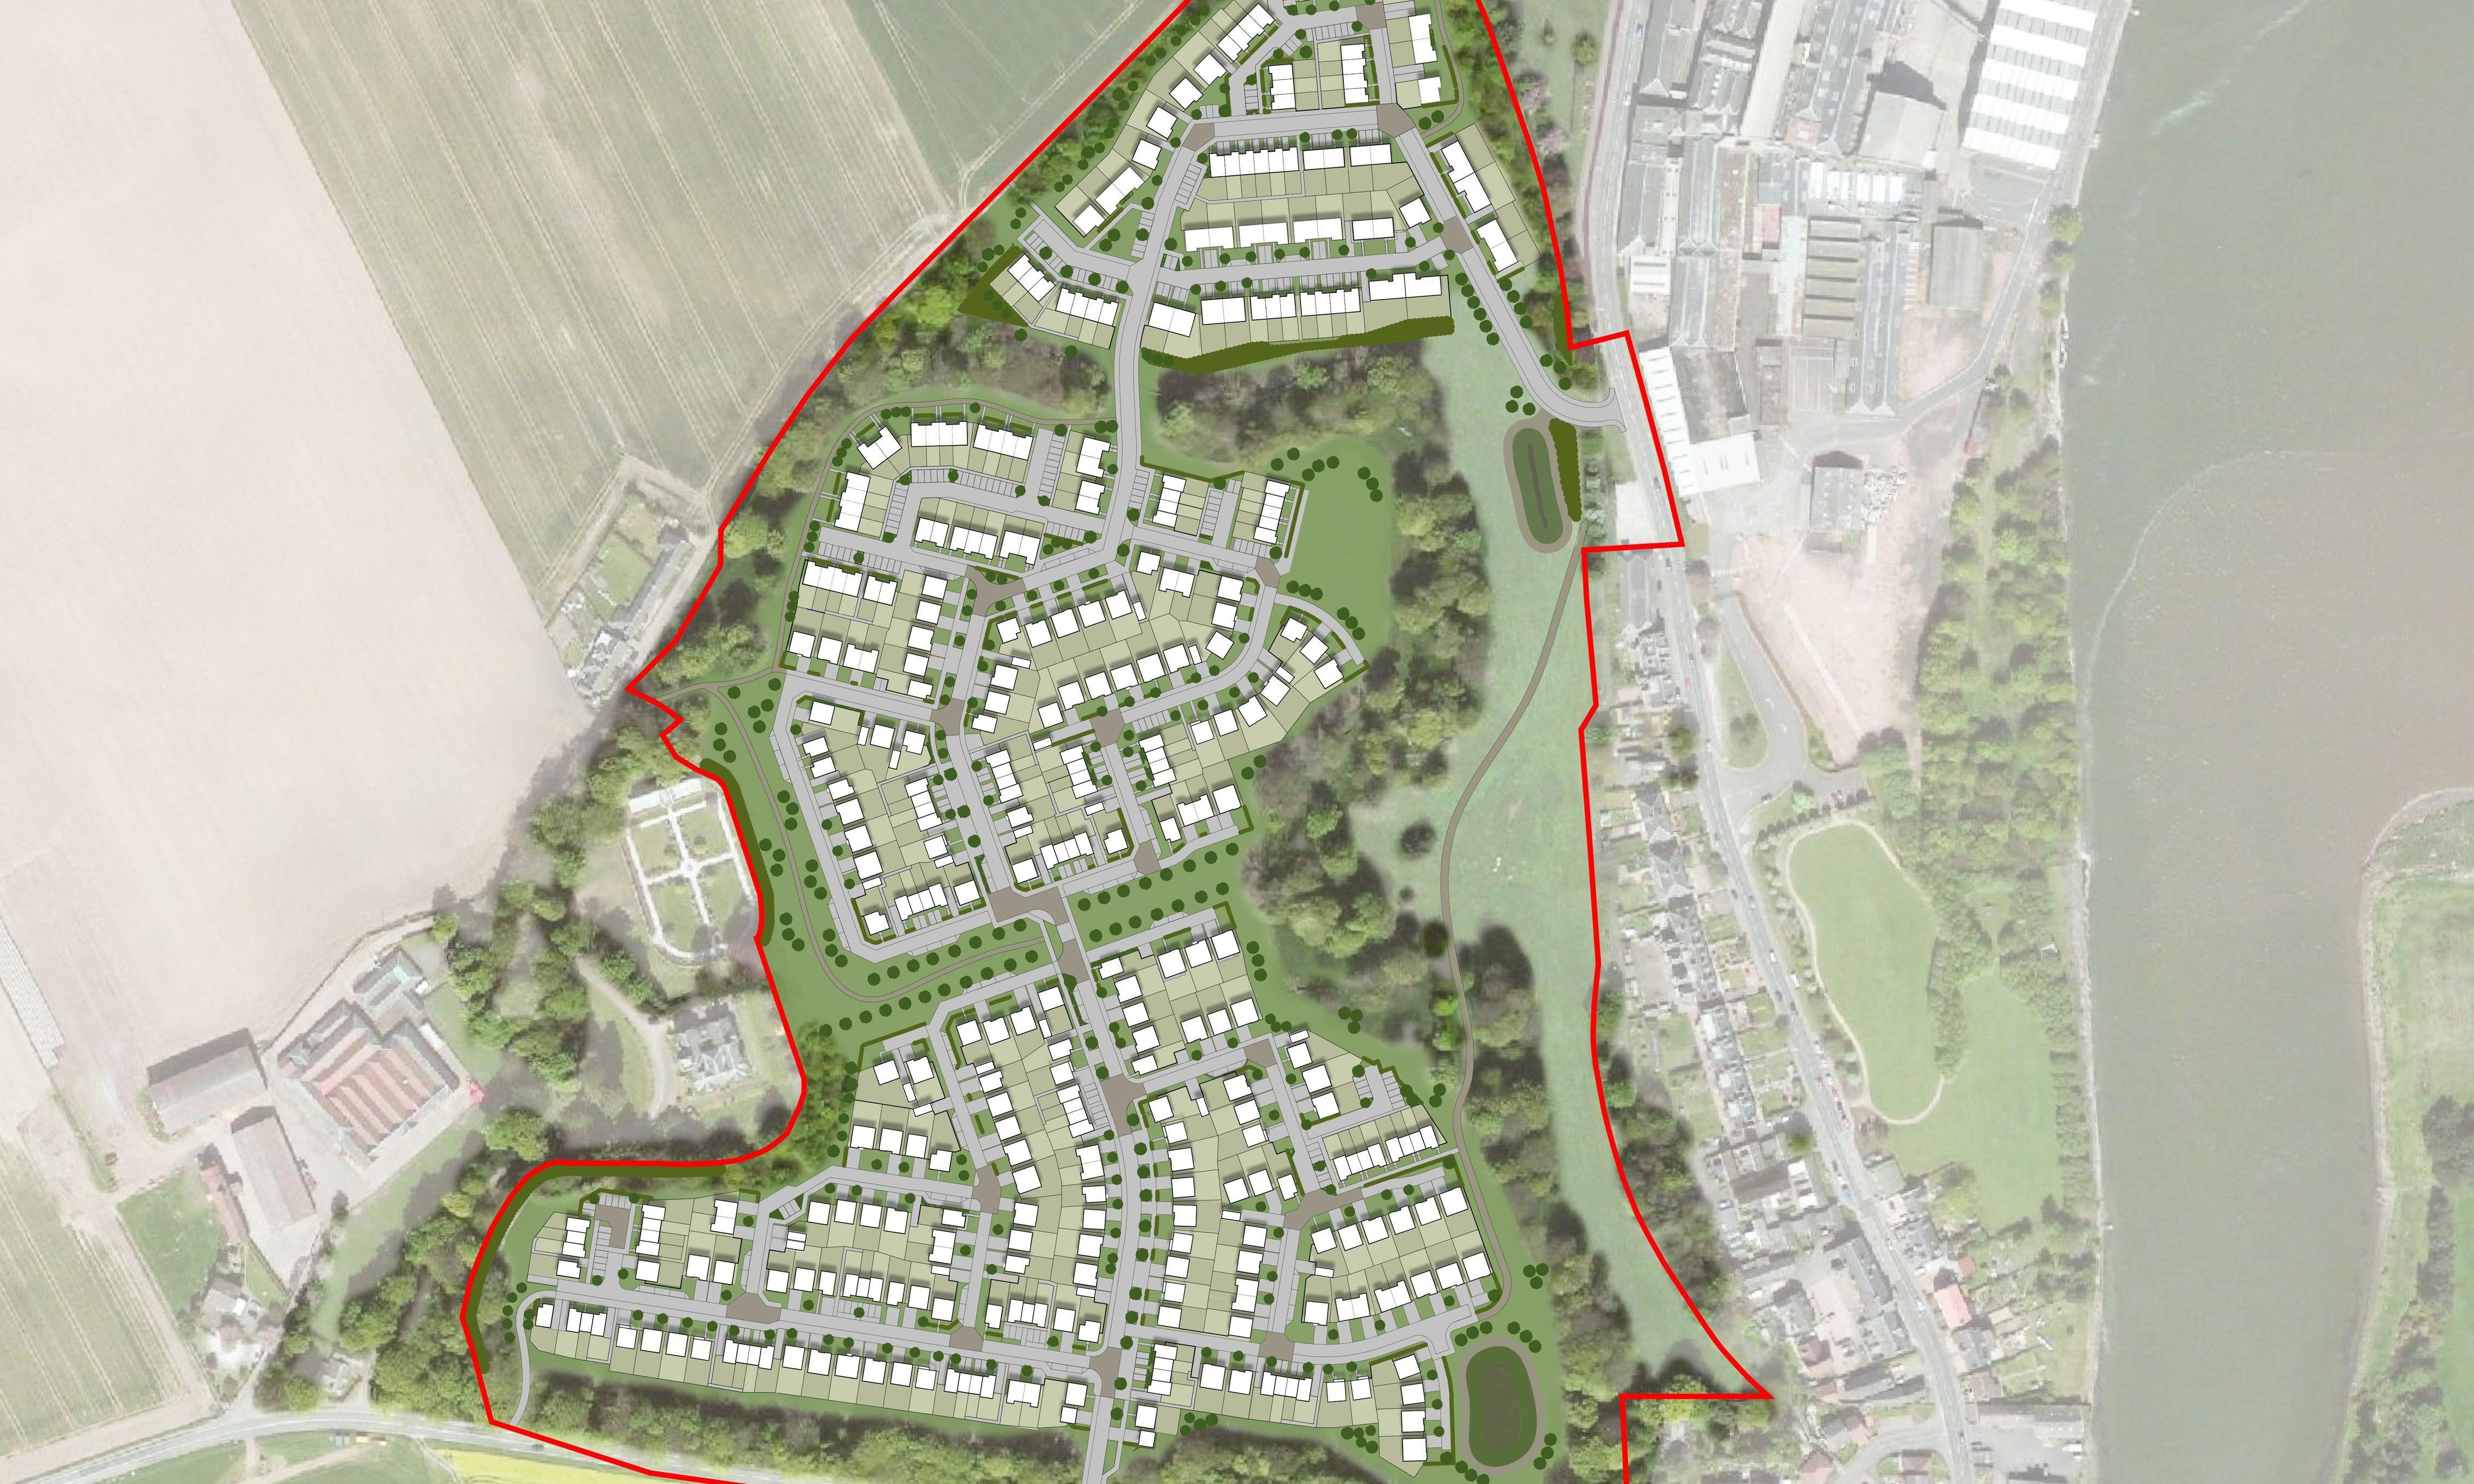 The new homes could increase the population of Guardbridge by 50%